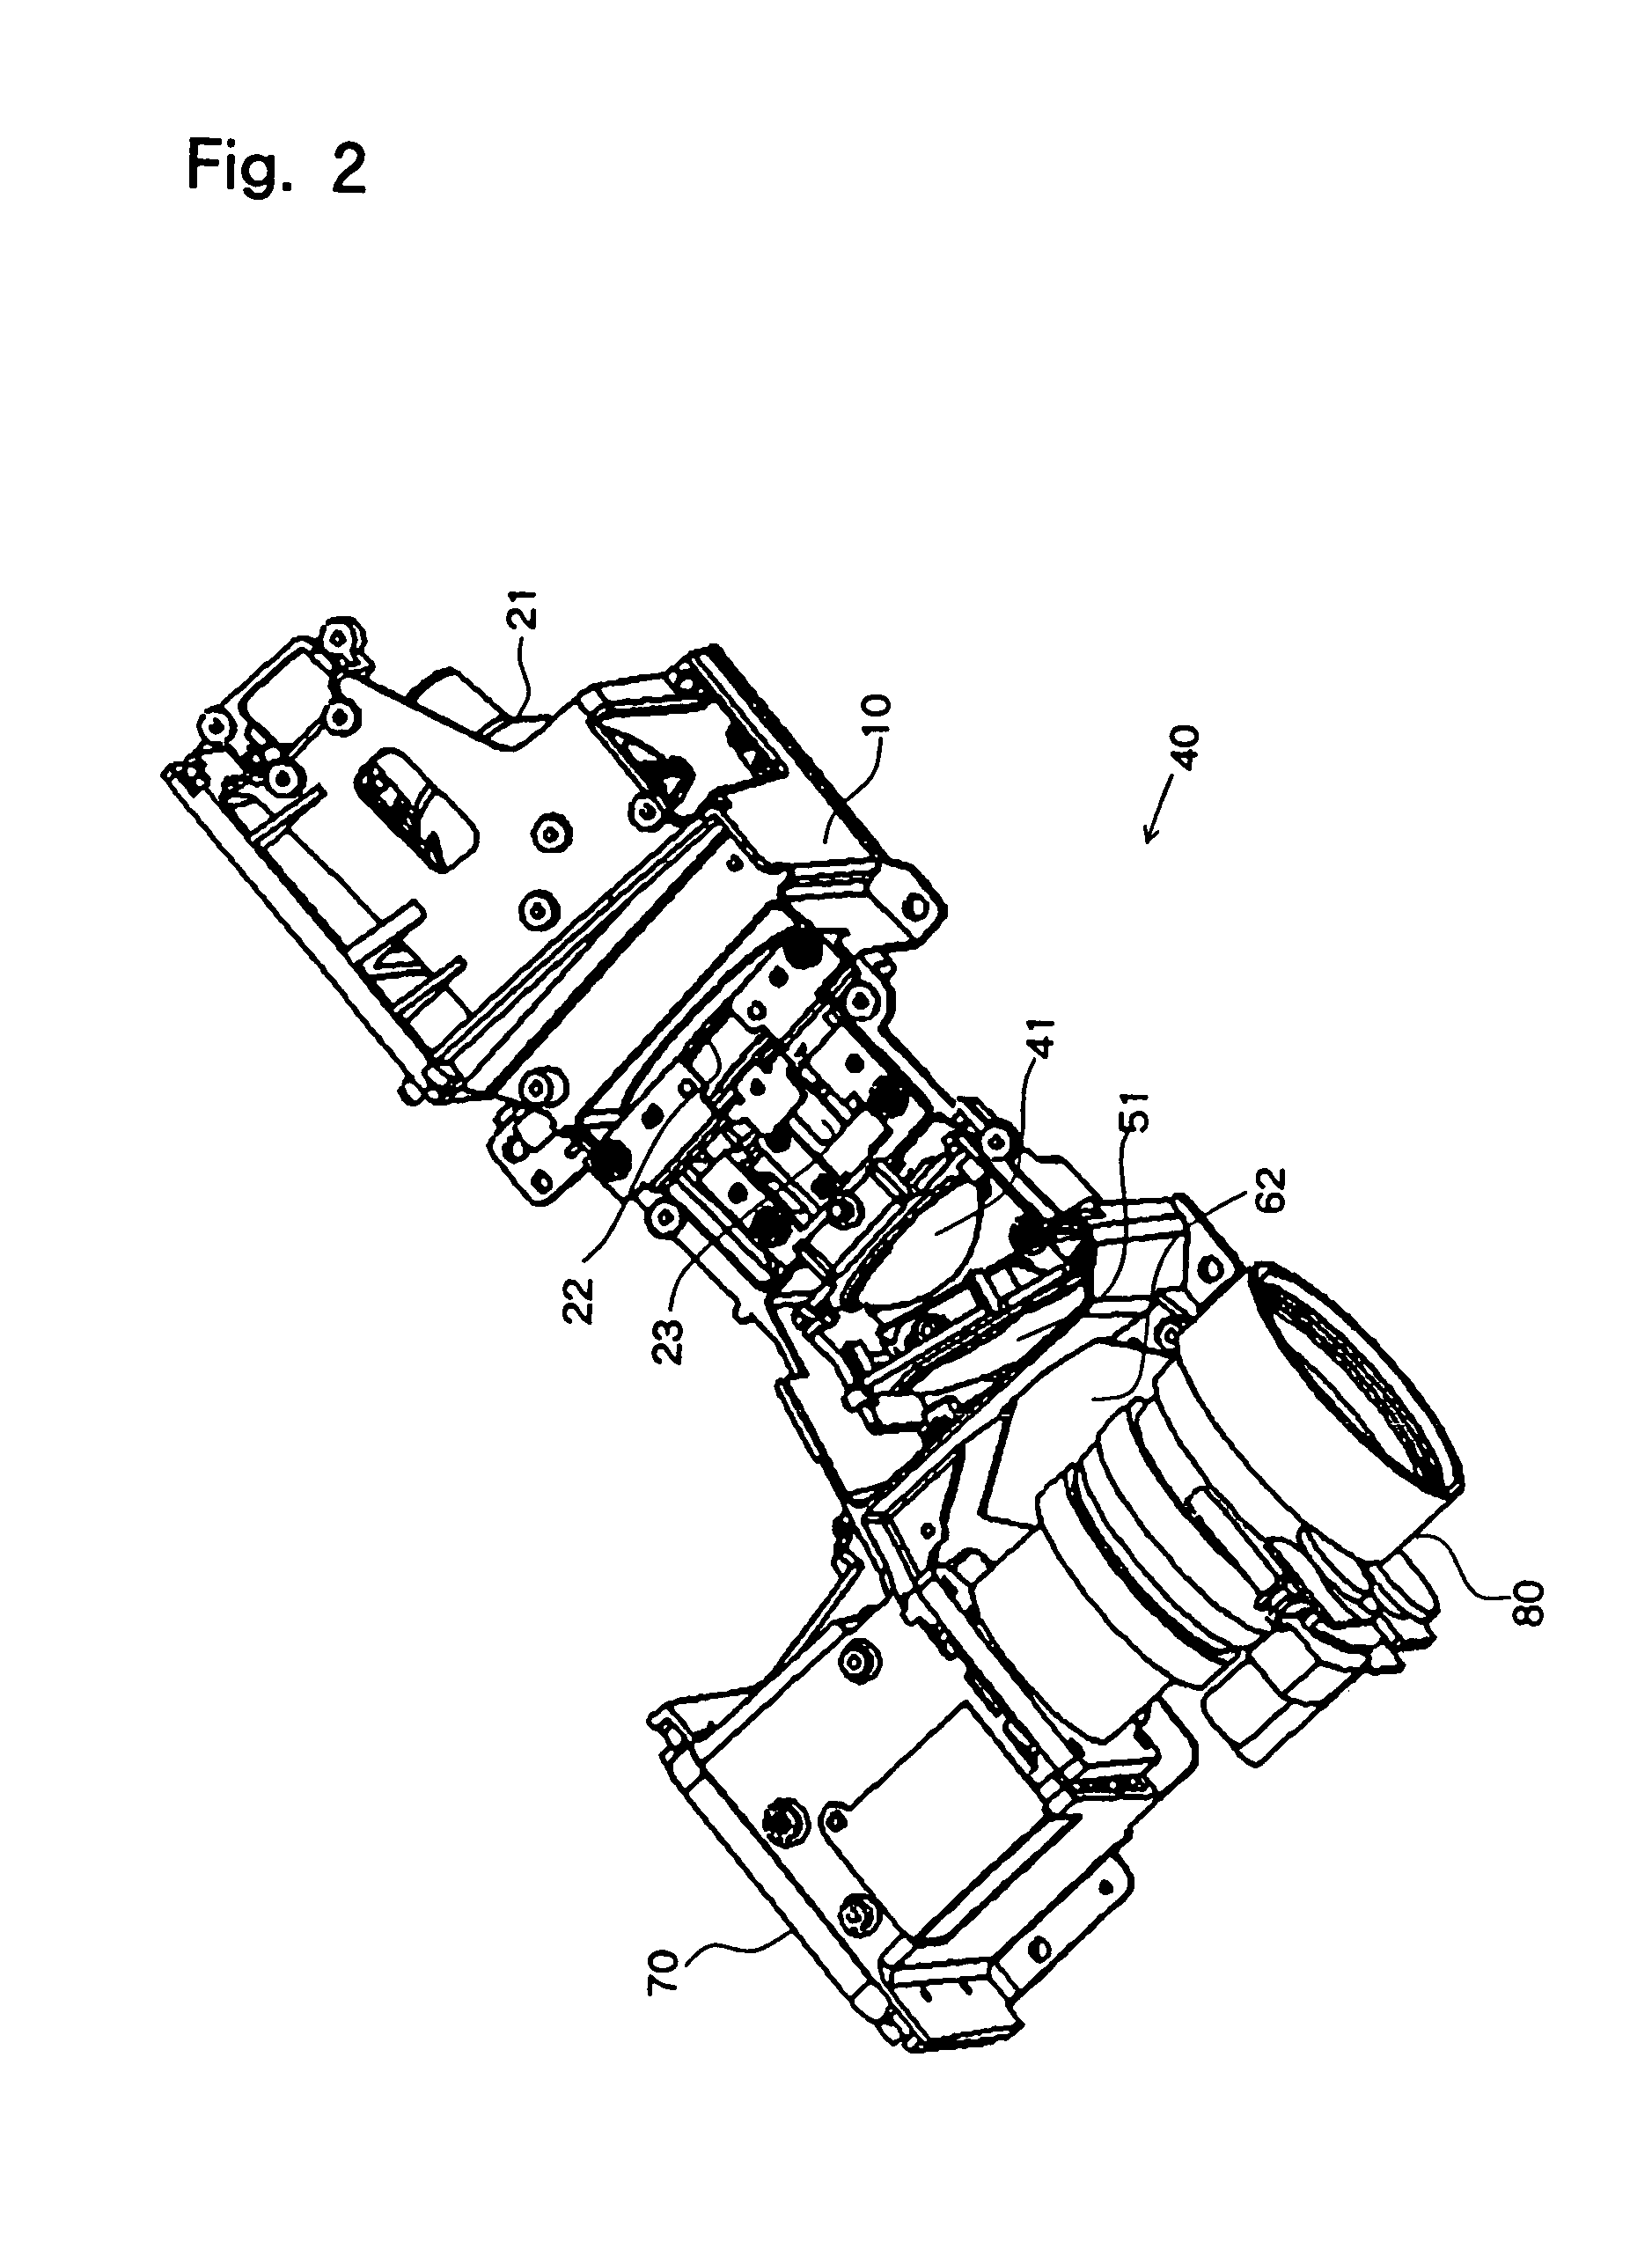 Optical unit for projection display apparatus and projection display apparatus